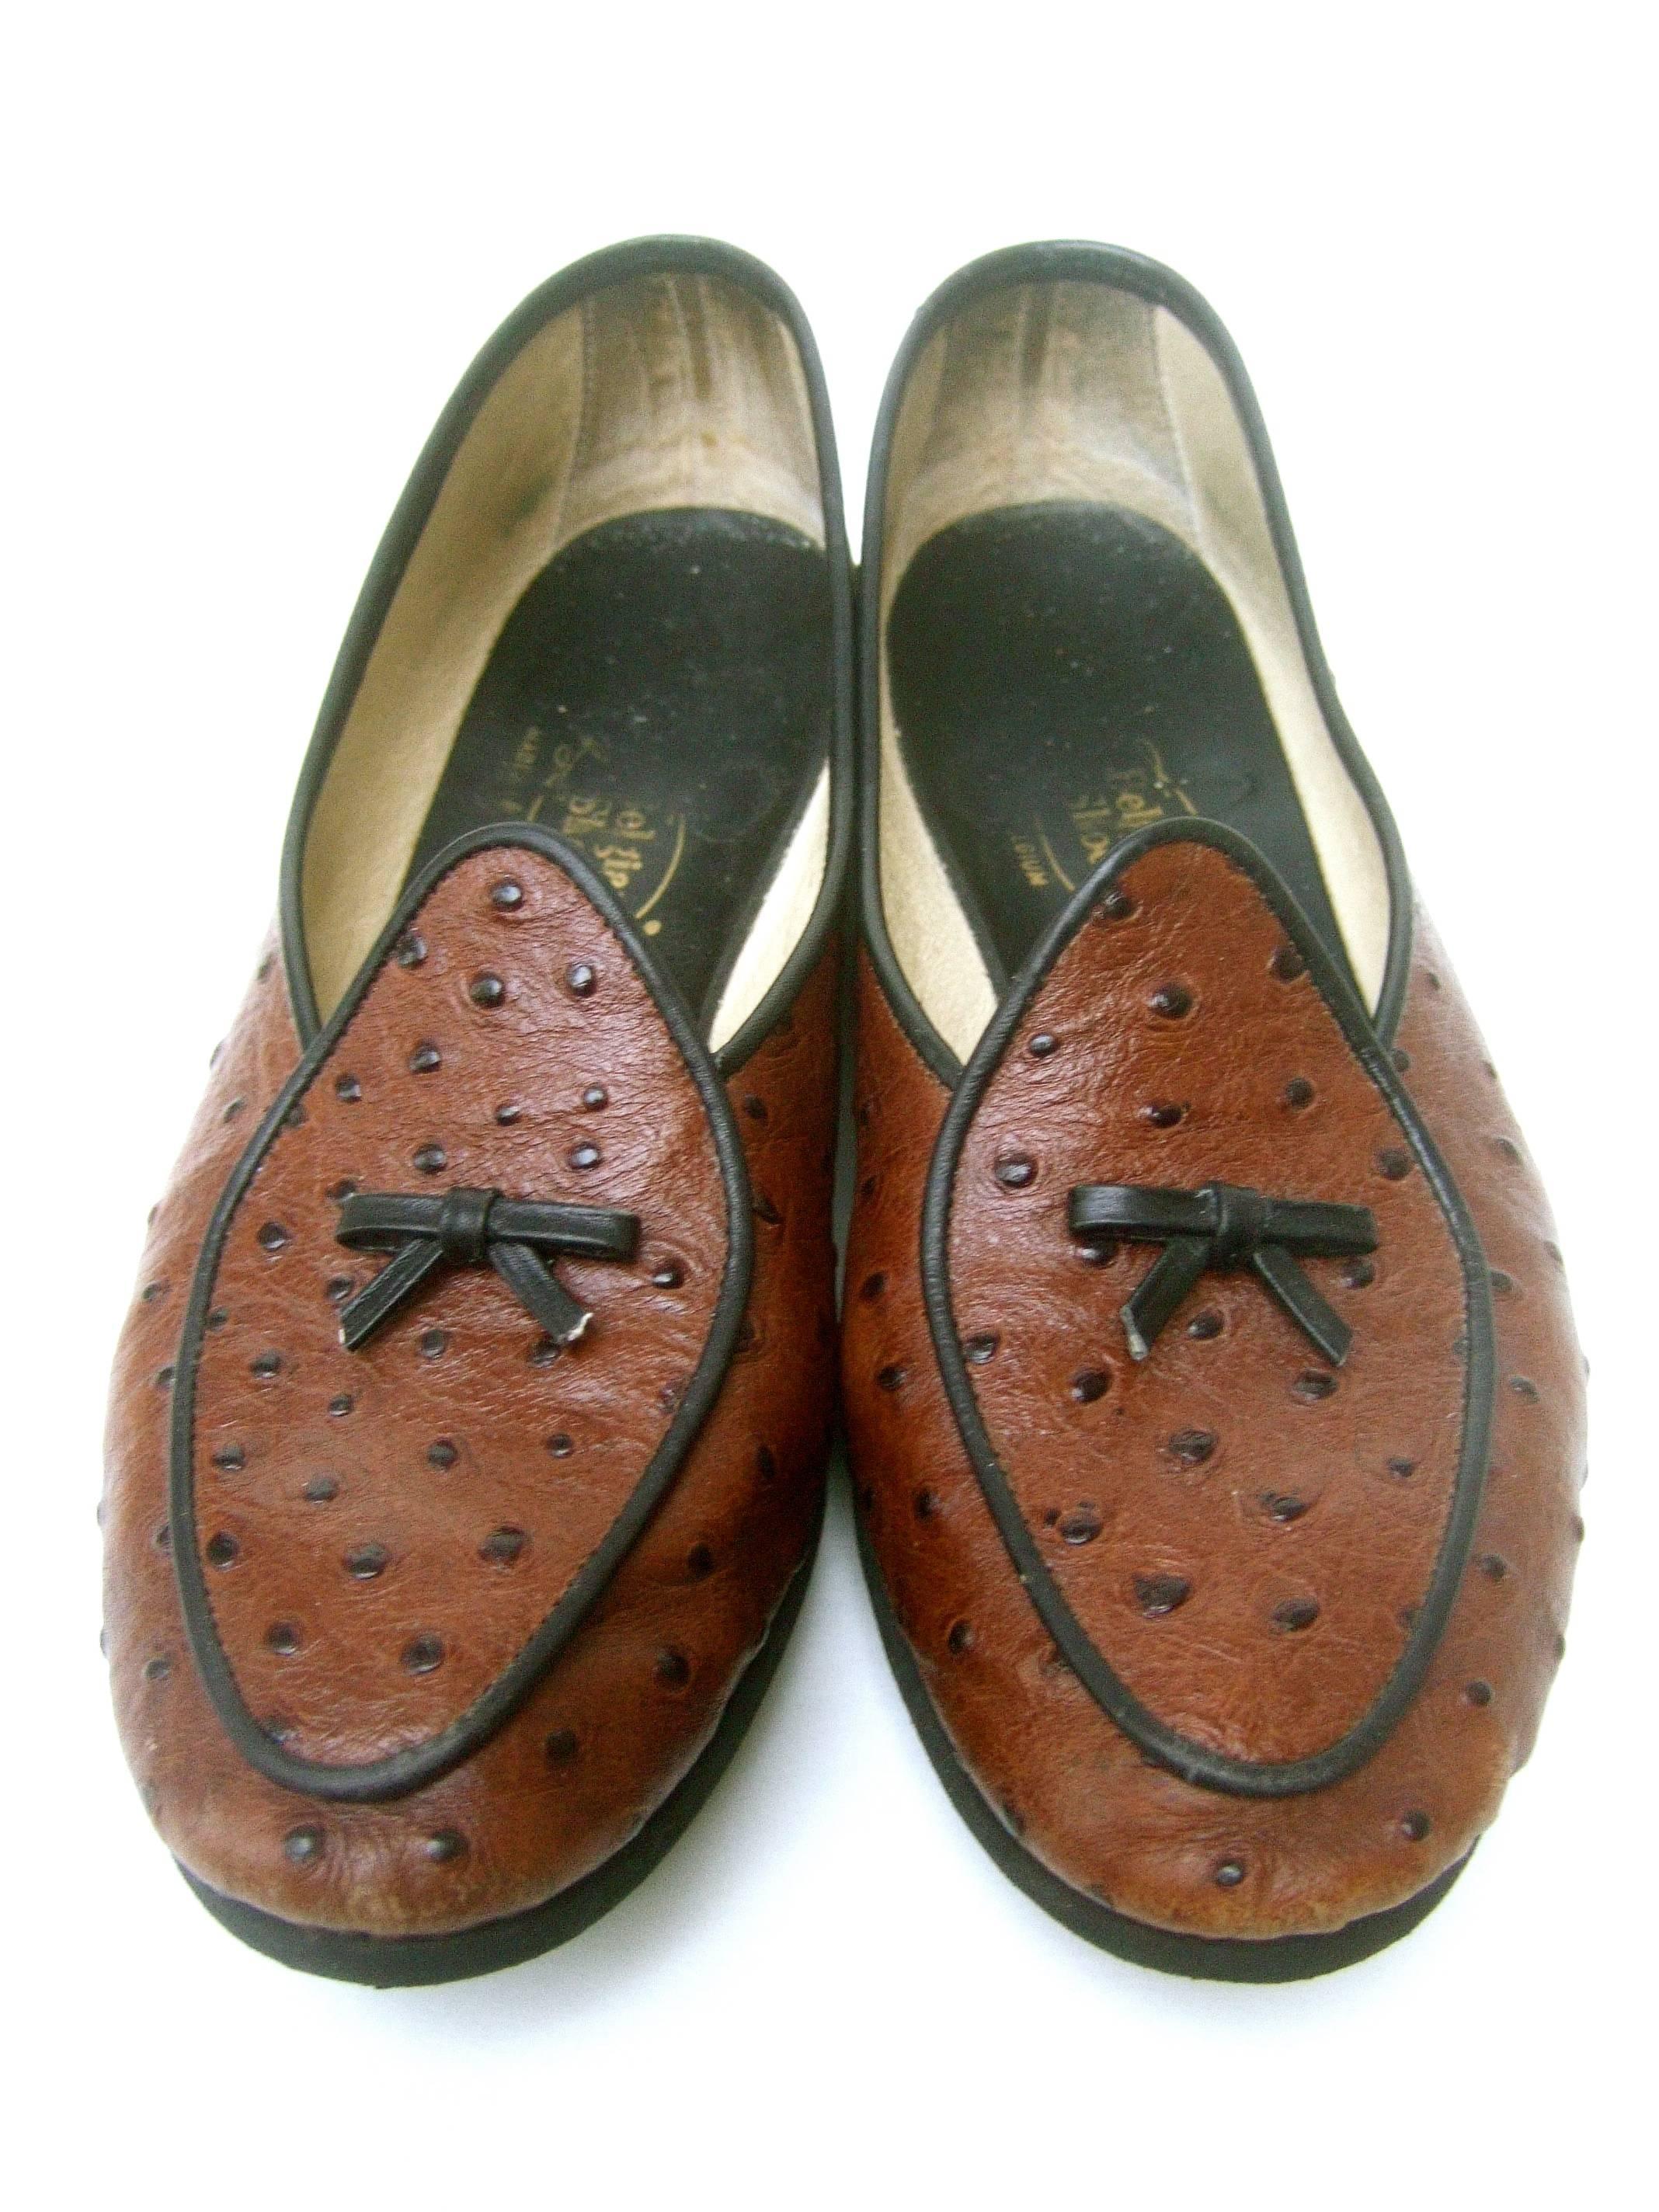 Belgian brown leather ostrich leather loafers US Size 7 WW 
The classic Belgian loafer flats are designed with 
brown ostrich leather; accented with their 
signature small bow detail on each shoe

The edges are framed with black leather
piping